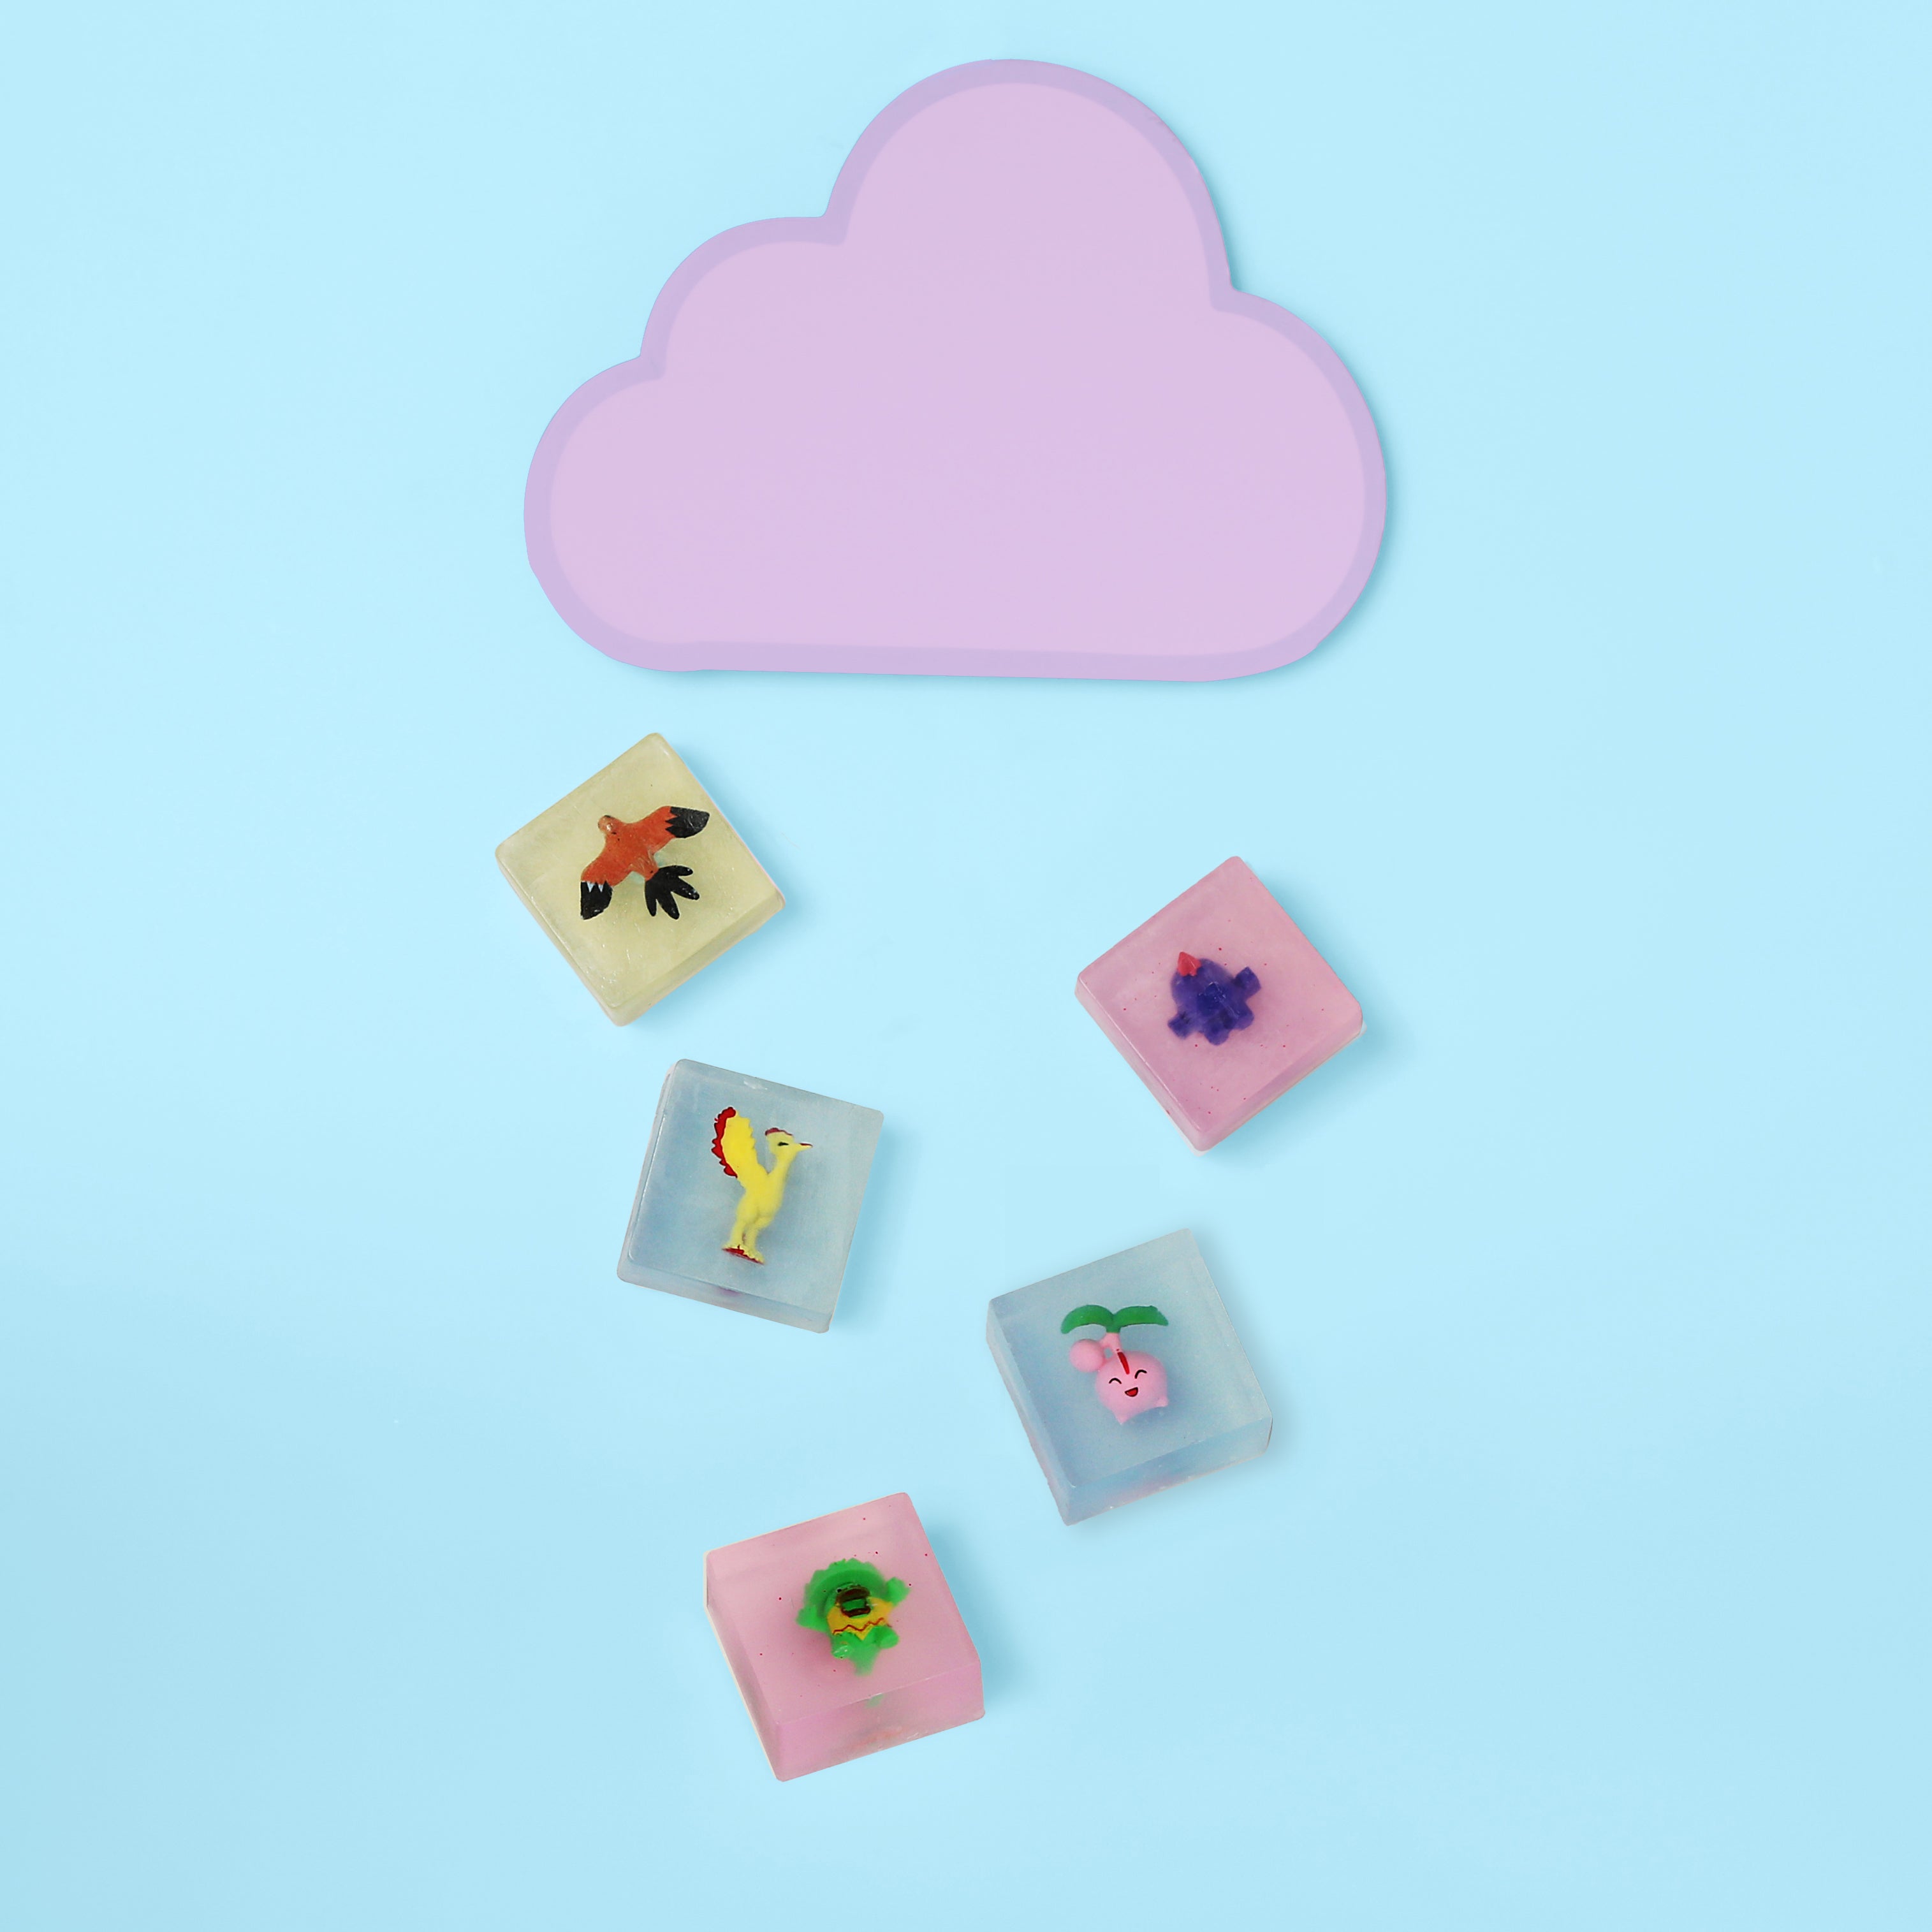 Blue background with pink cloud and a collection of five soaps beneath it. Clear glycerin like soap with toy inside.